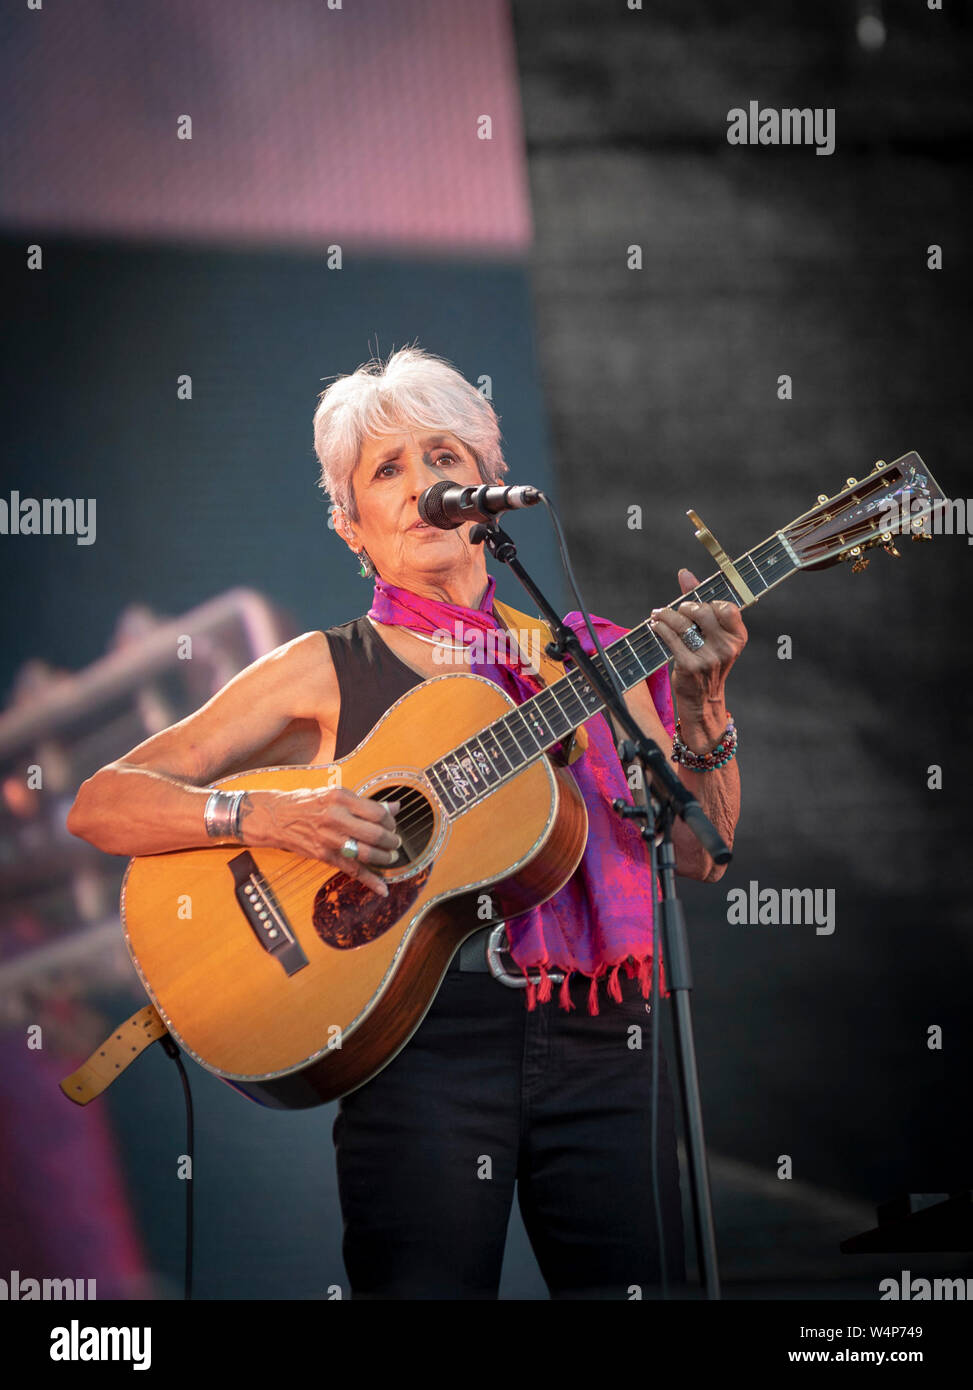 Zurriola beach, Spain. 24th July 2019. Joan Baez performing the 24th July 2019 at the Green Heineken Stage, placed on the Zurriola beach, of the Heineken Jazz Festival one of his latest concerts before she retires as a part of his Worldwide Tour “Fare The Wheel”. Taking place 24-28 July in Donostia-San Sebastian the 54 edition of Heineken Jazzaldia 2019 (Basque Country-Spain).  The Festival is one of the oldest in Europe and the oldest in Spain. Credit: Gary Roberts/Alamy Live News Stock Photo